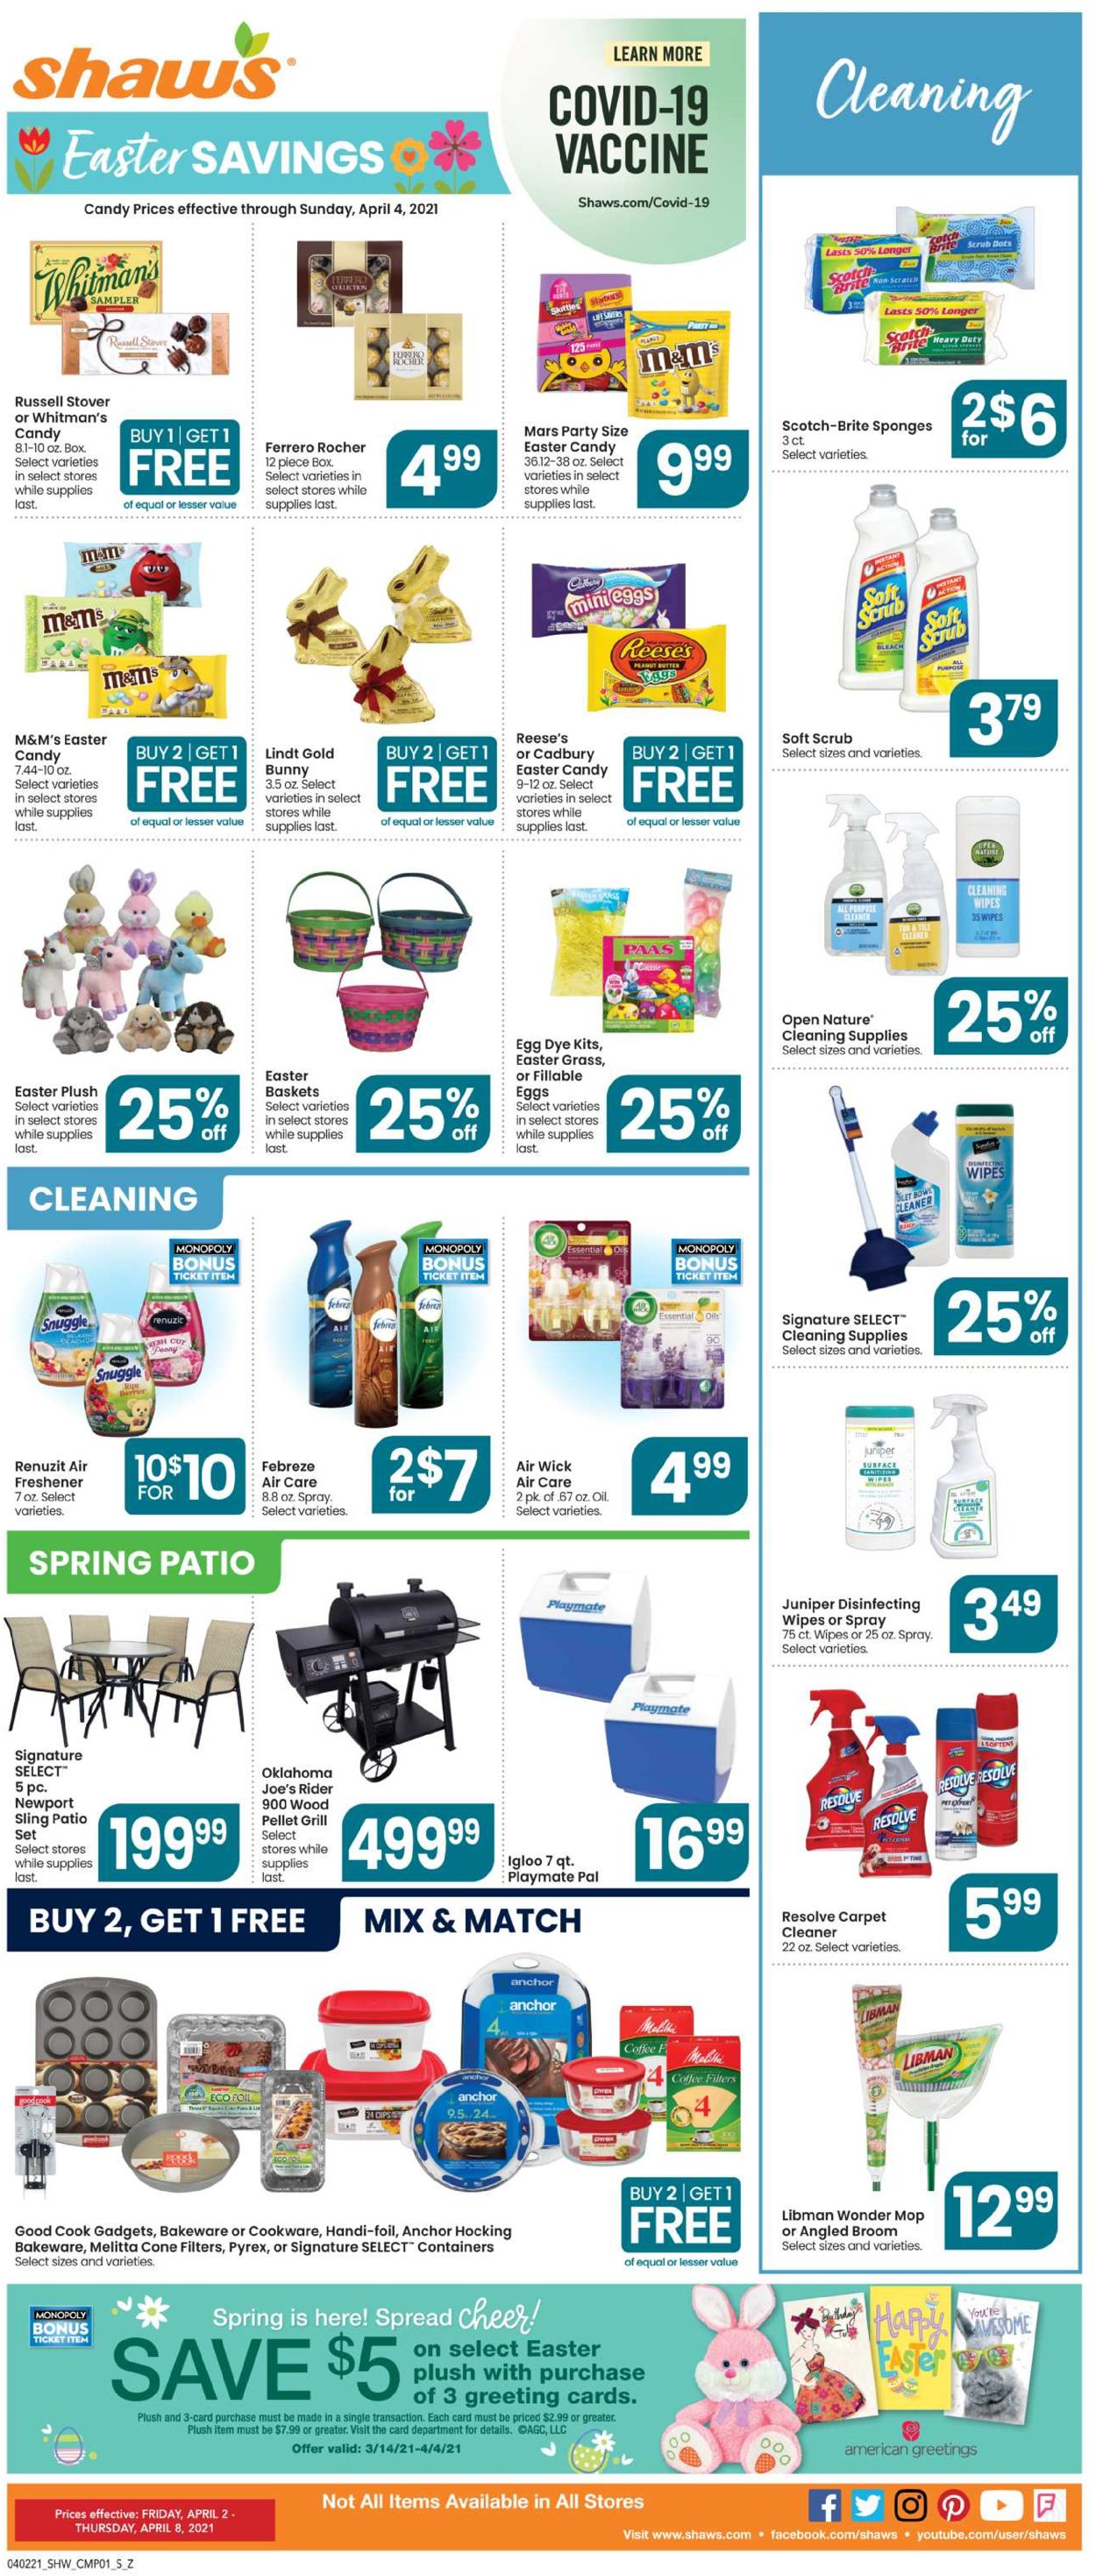 Shaw’s - Easter 2021 Ad Weekly Ad Circular - valid 04/02-04/08/2021 (Page 5)